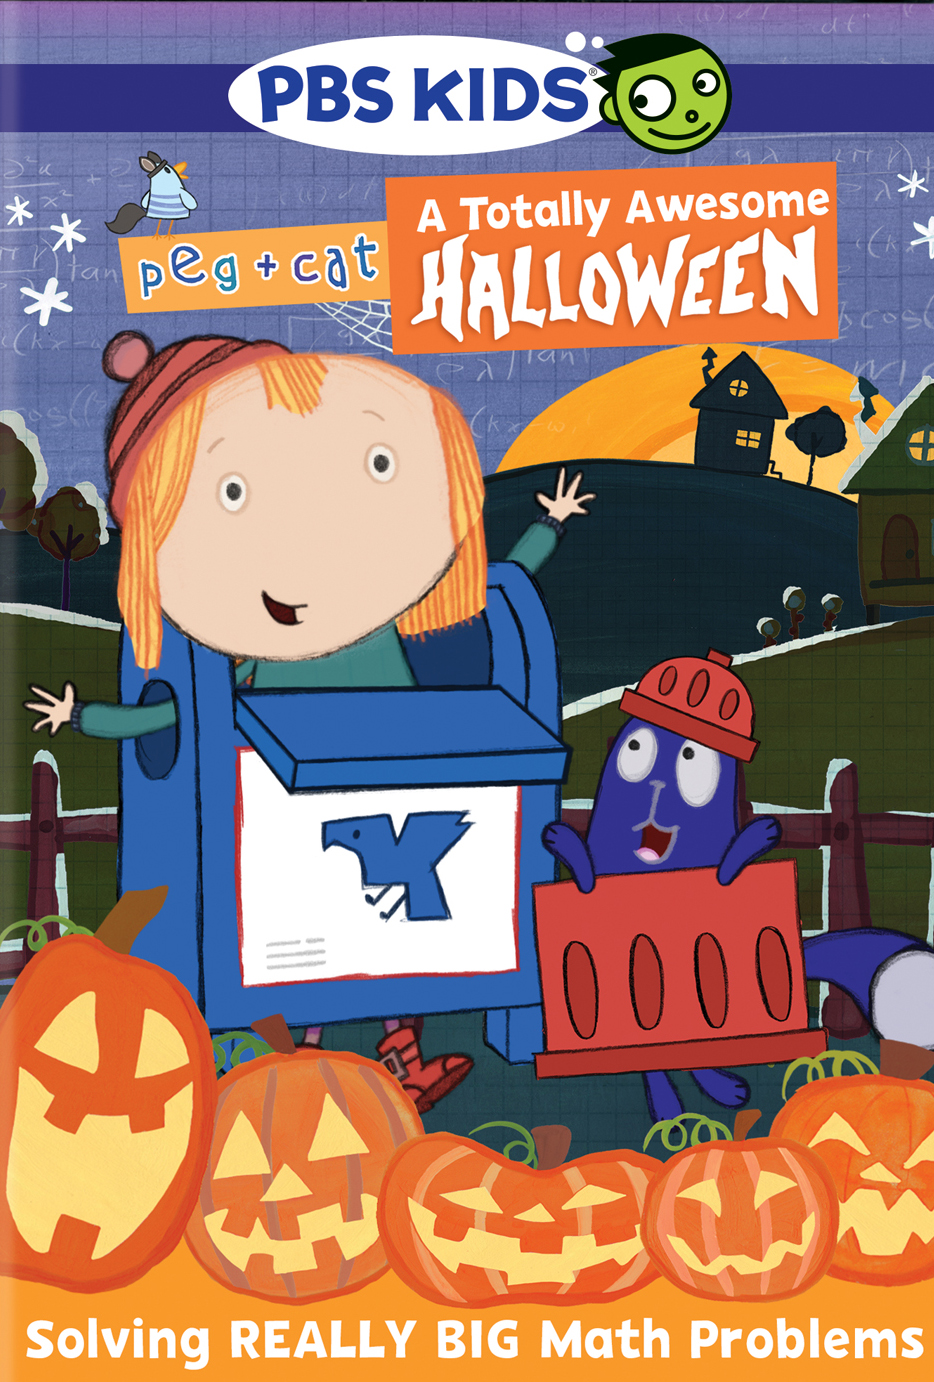 Best Buy: Peg + Cat: Halloween Fun A Totally Awesome Halloween [DVD]